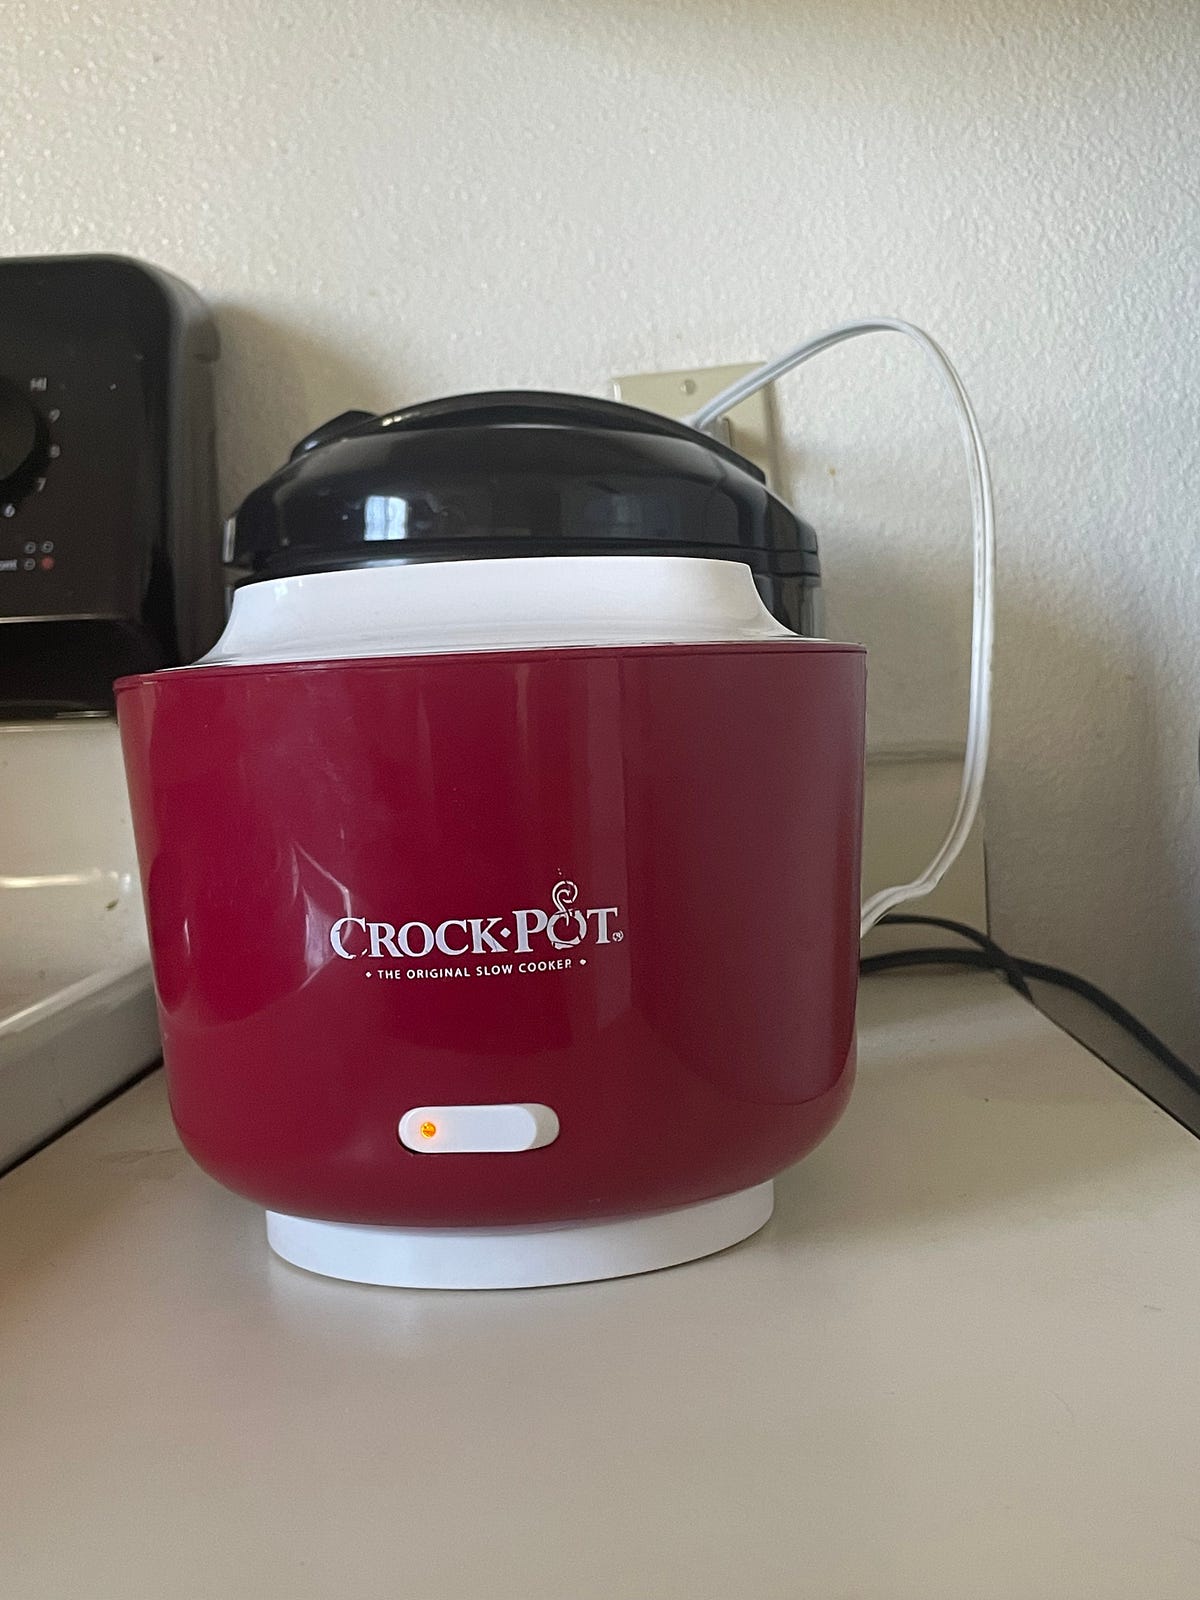 This Is The Mini Crockpot You NEED in Your Life